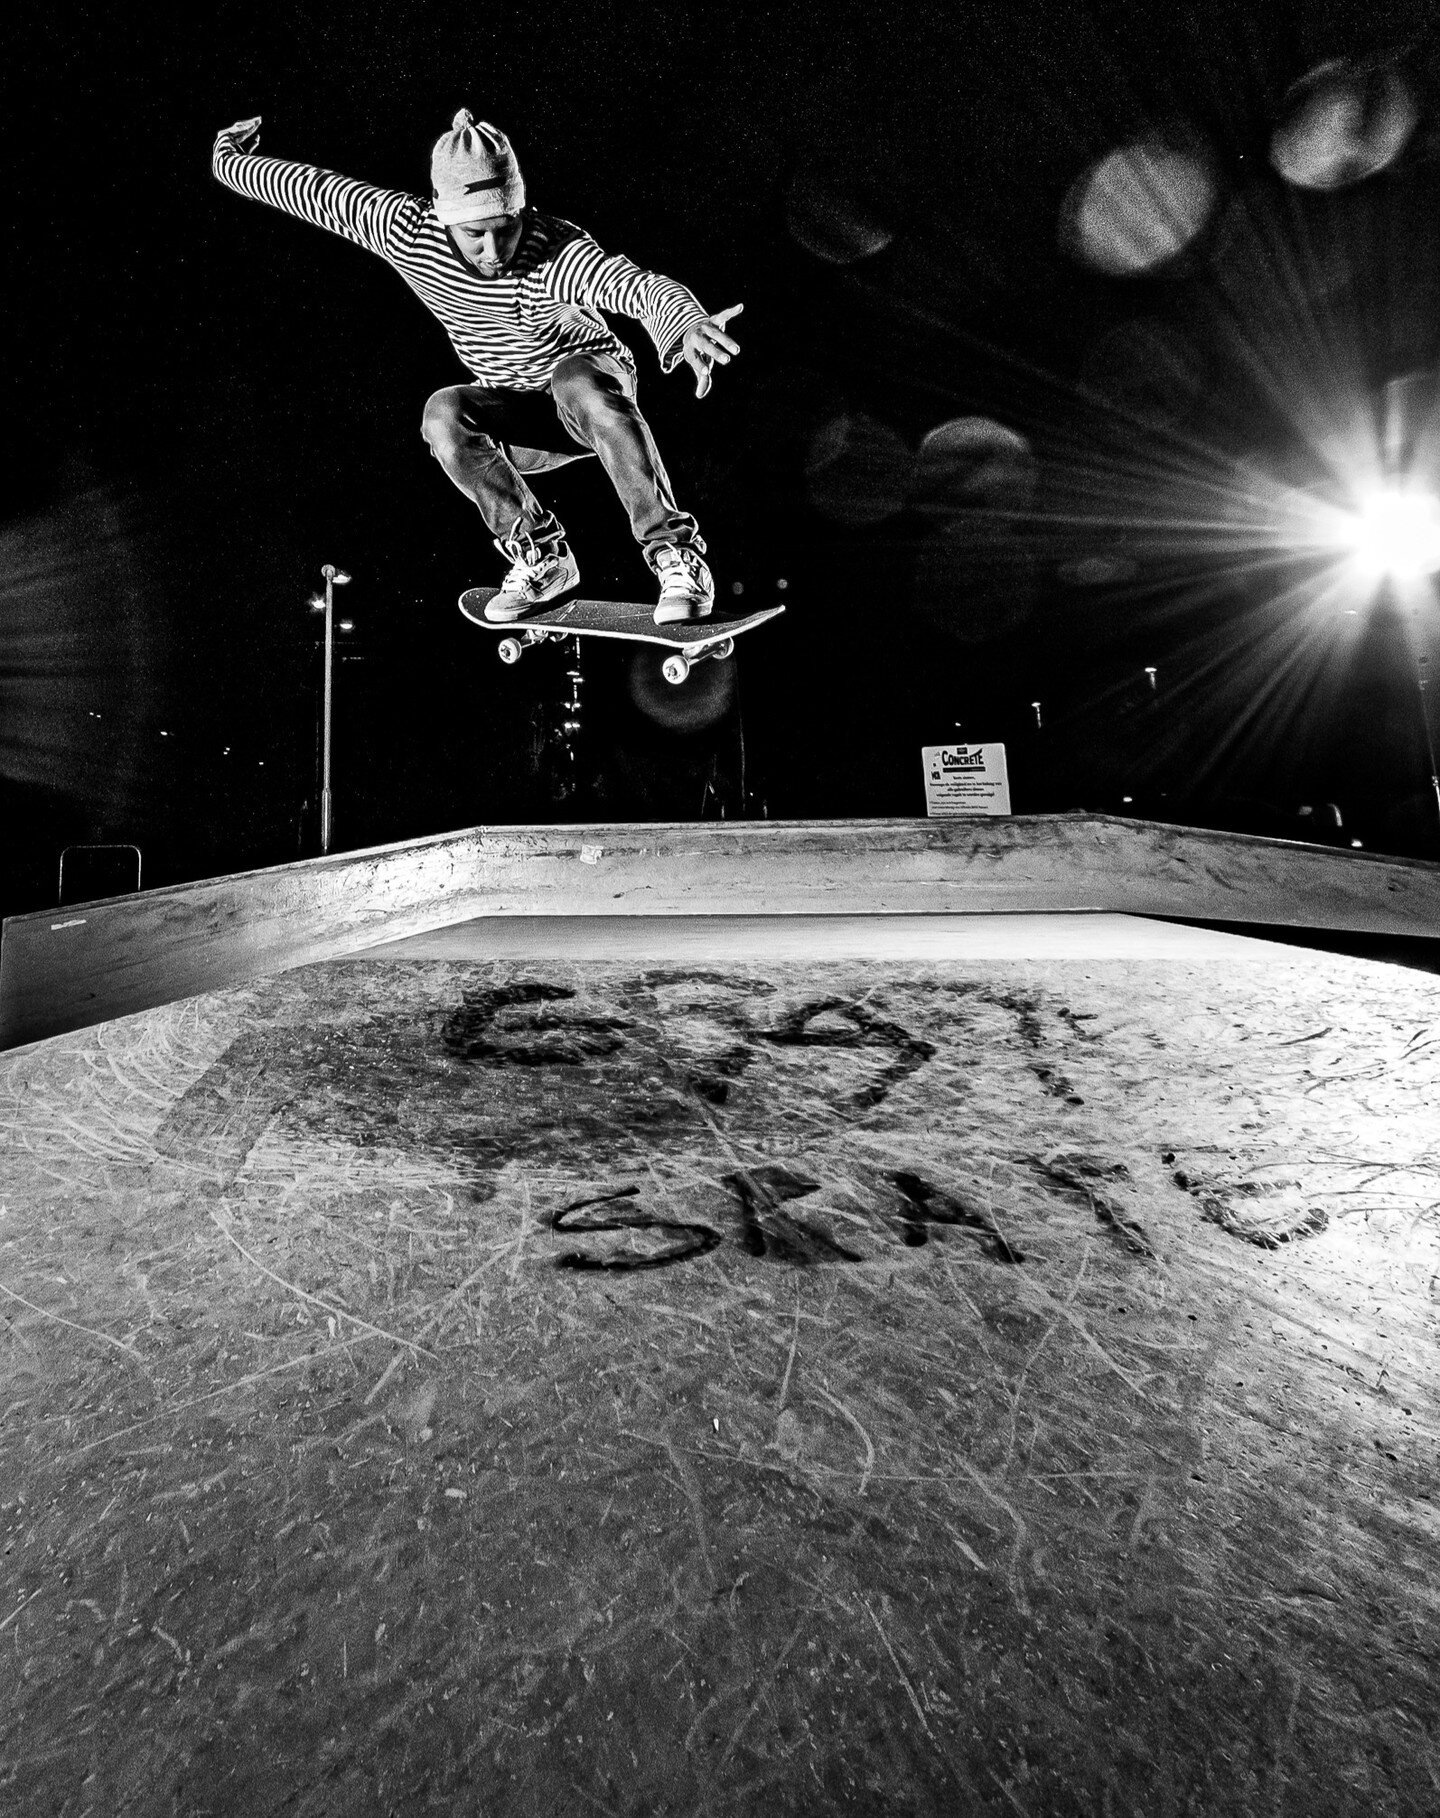 12 years ago with creative @roderikpatijn

Shot in a Nikon D300 at 15mm
2 strobes triggered with @pocketwizard radio triggers. Fun times!

Let's go again Ro!

#skate #strobist #lightshapers #sportsphotography